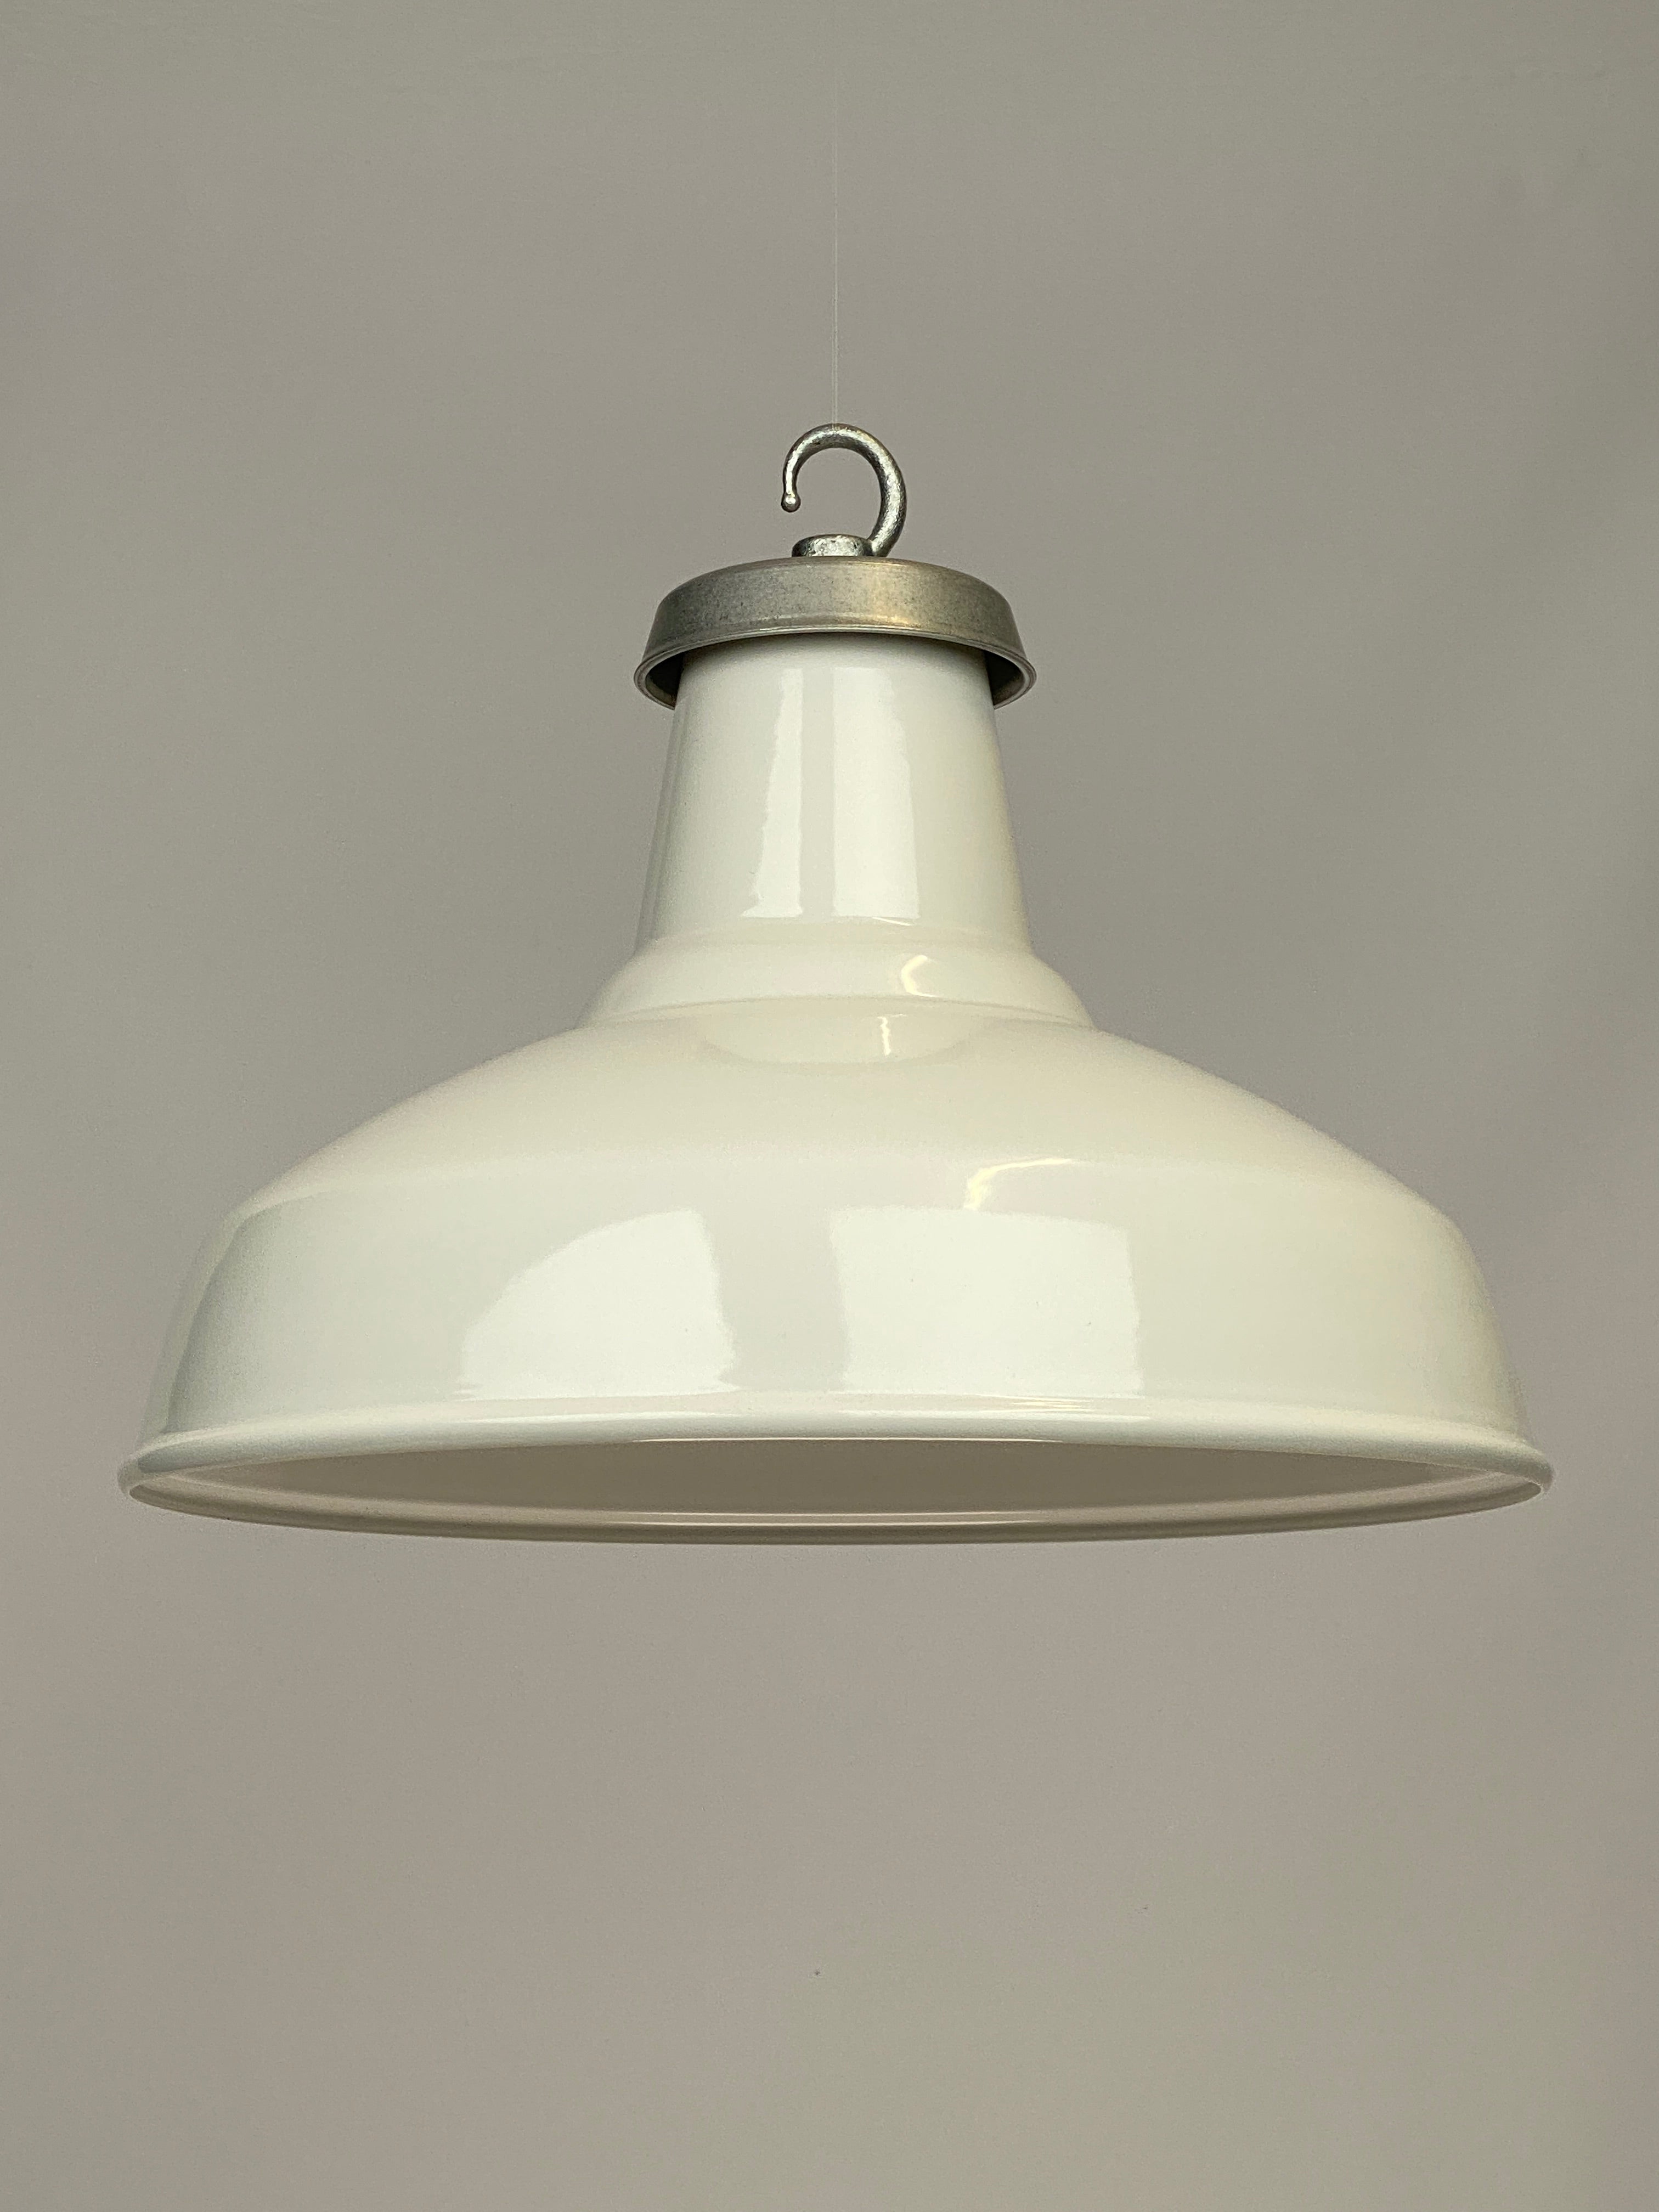 Example of a worn lighting shade. This is a white gloss enamel shade with stone rumbled aluminium gallery & galvanised hook.